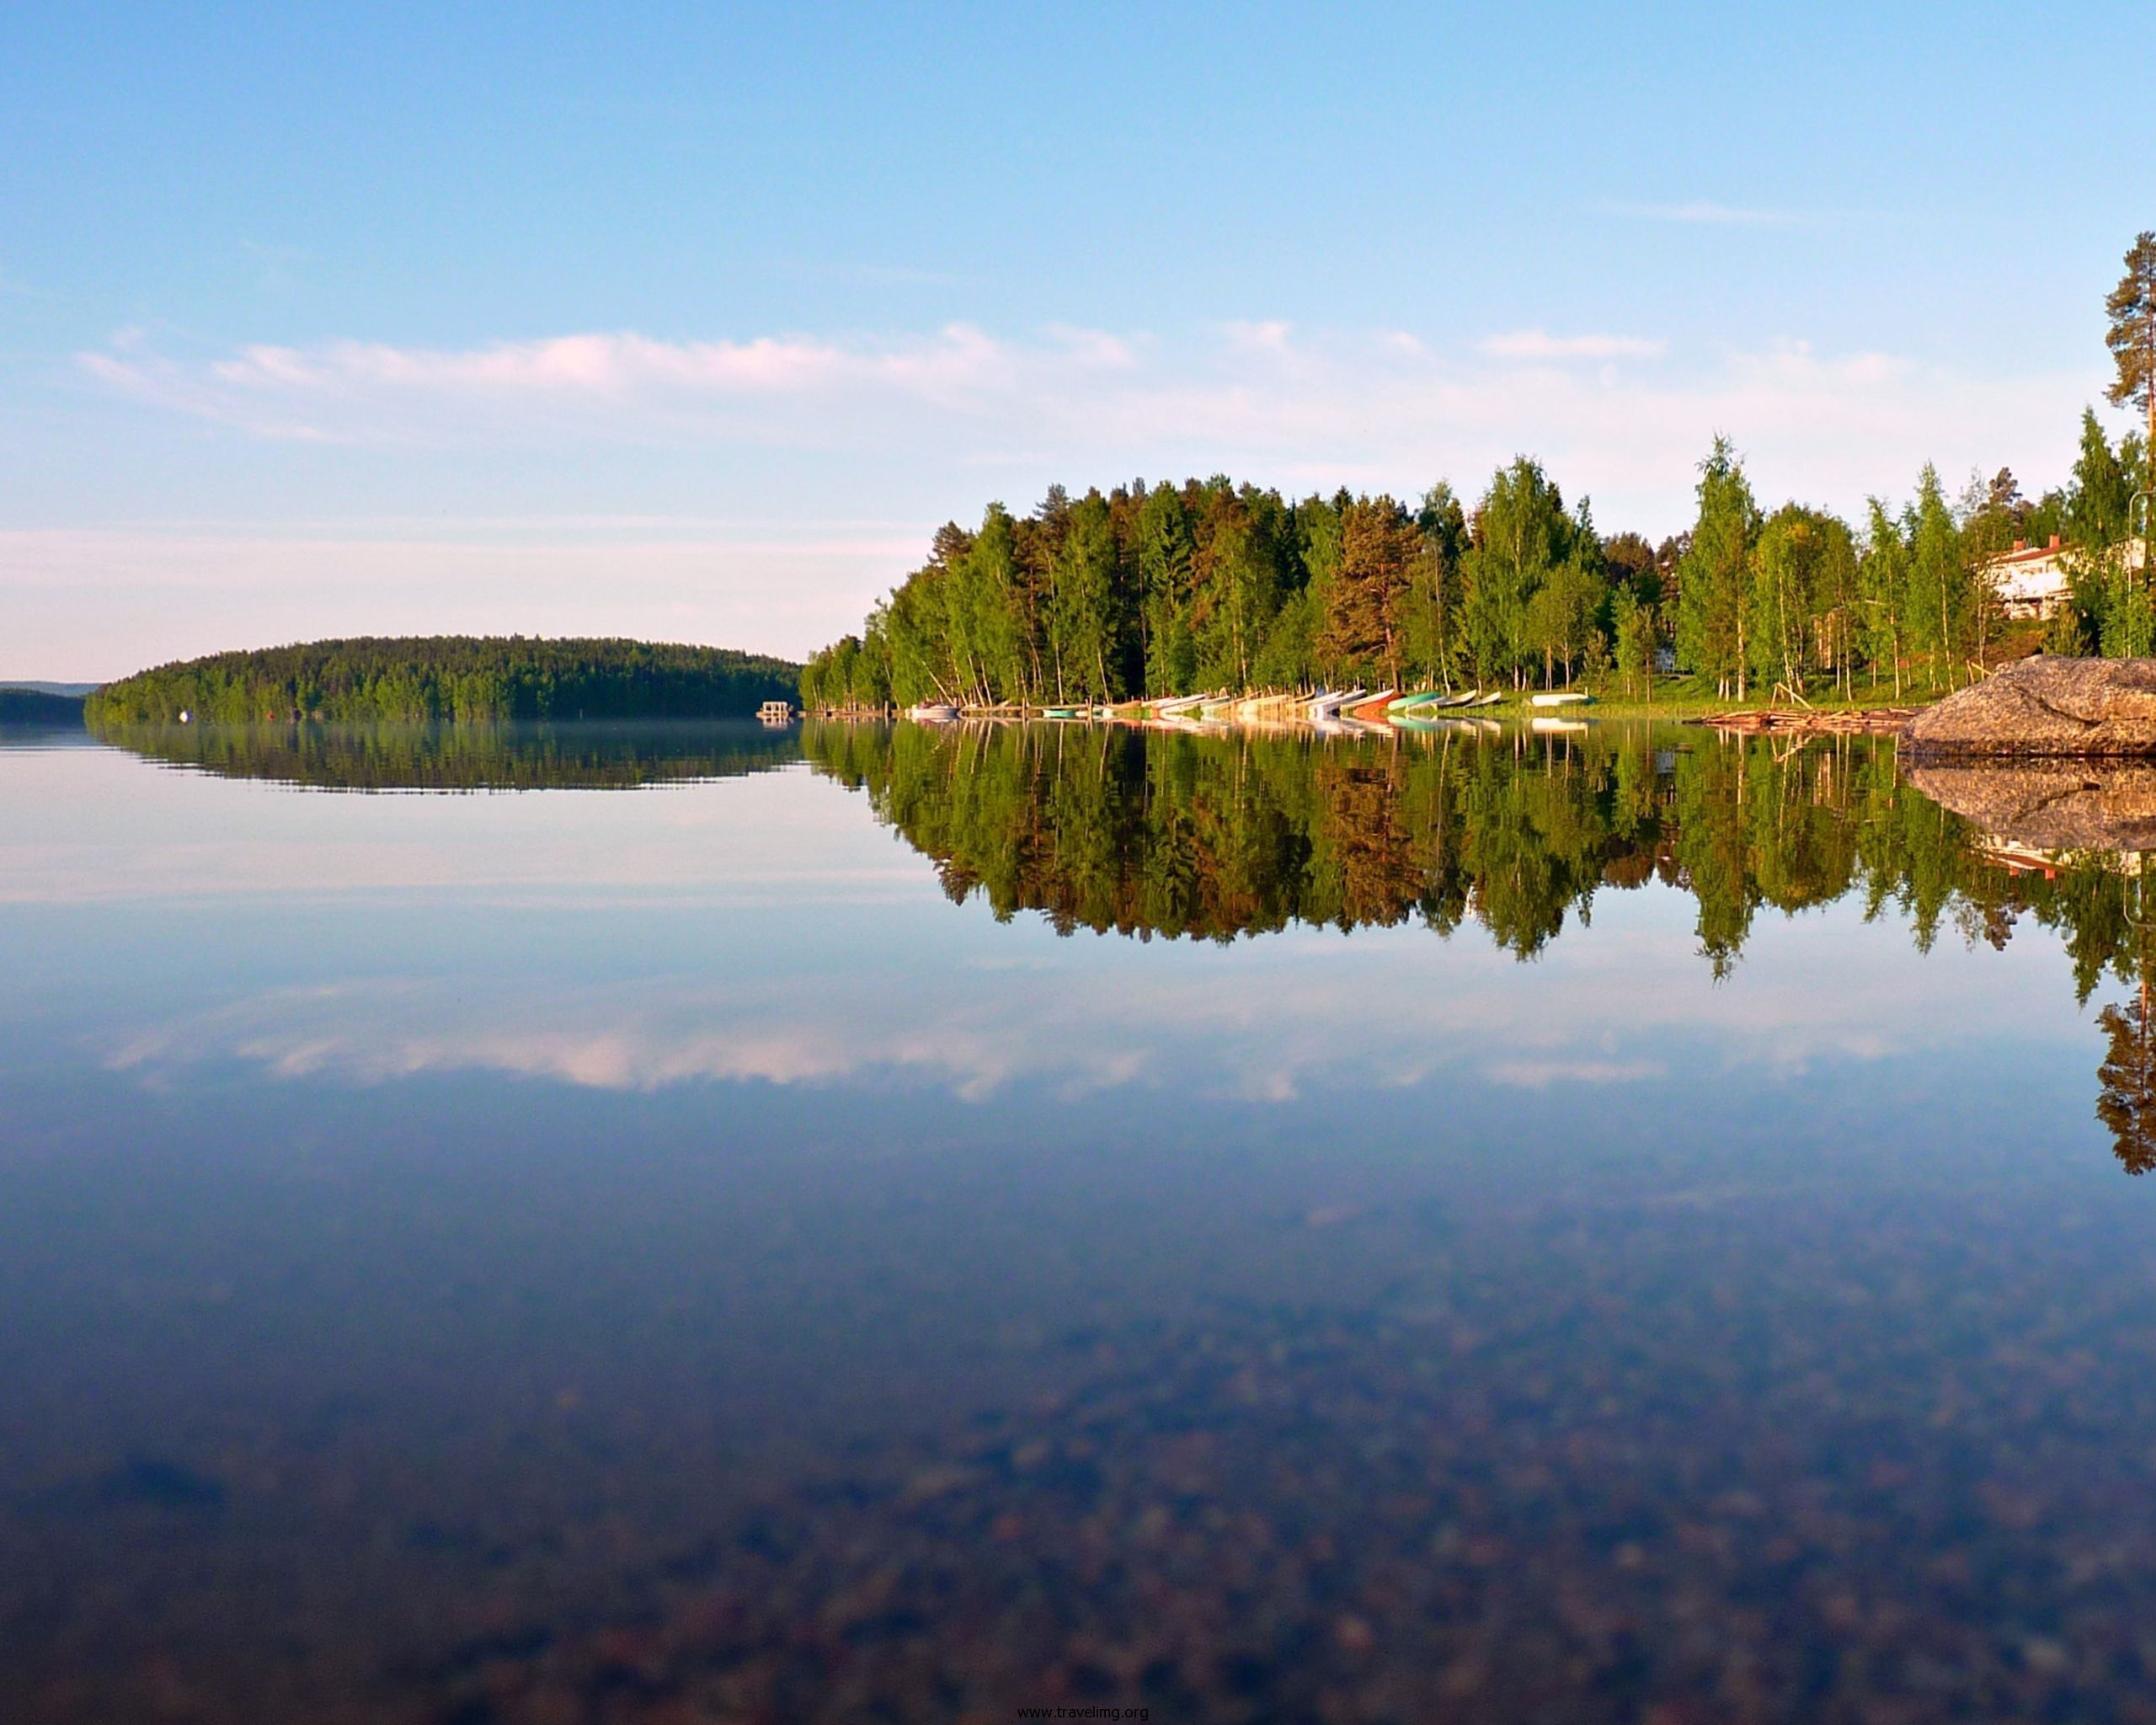 Finland: The country has more than 180,000 recorded lakes. 2560x2050 HD Wallpaper.